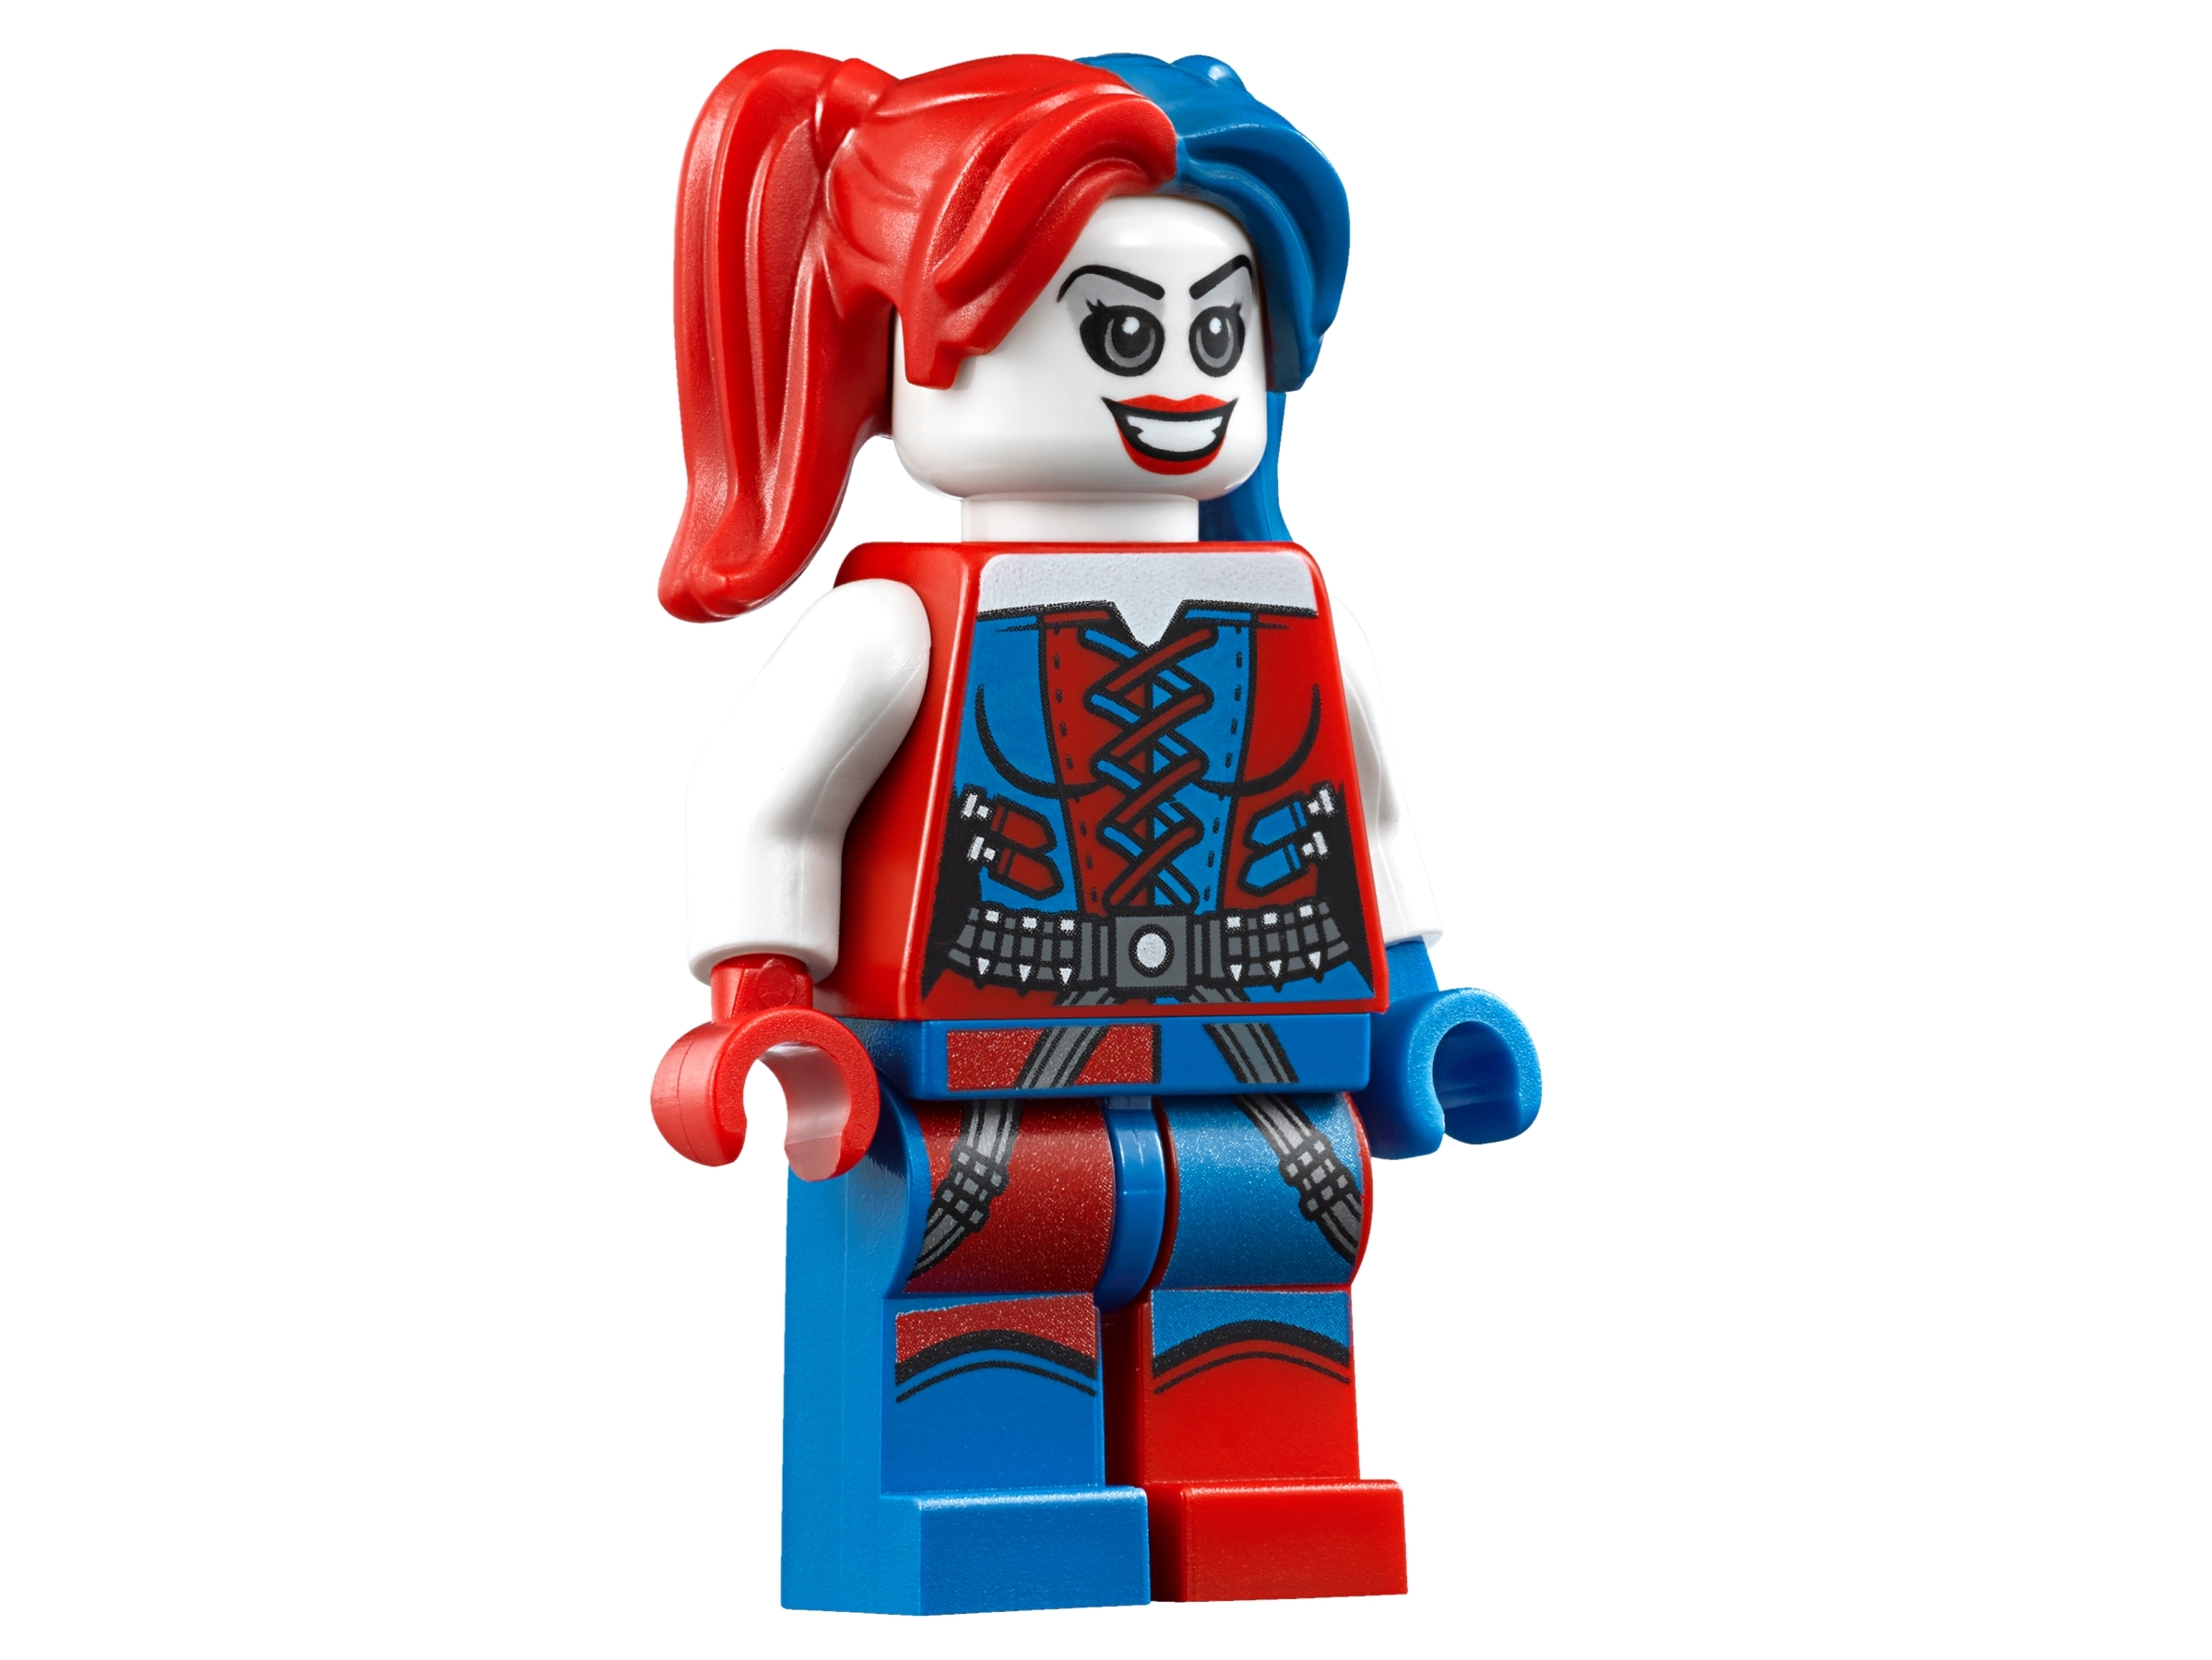 Lego Harley Quinn 76053 Blue and Red Hands & Pigtails Super Heroes Minifigure 